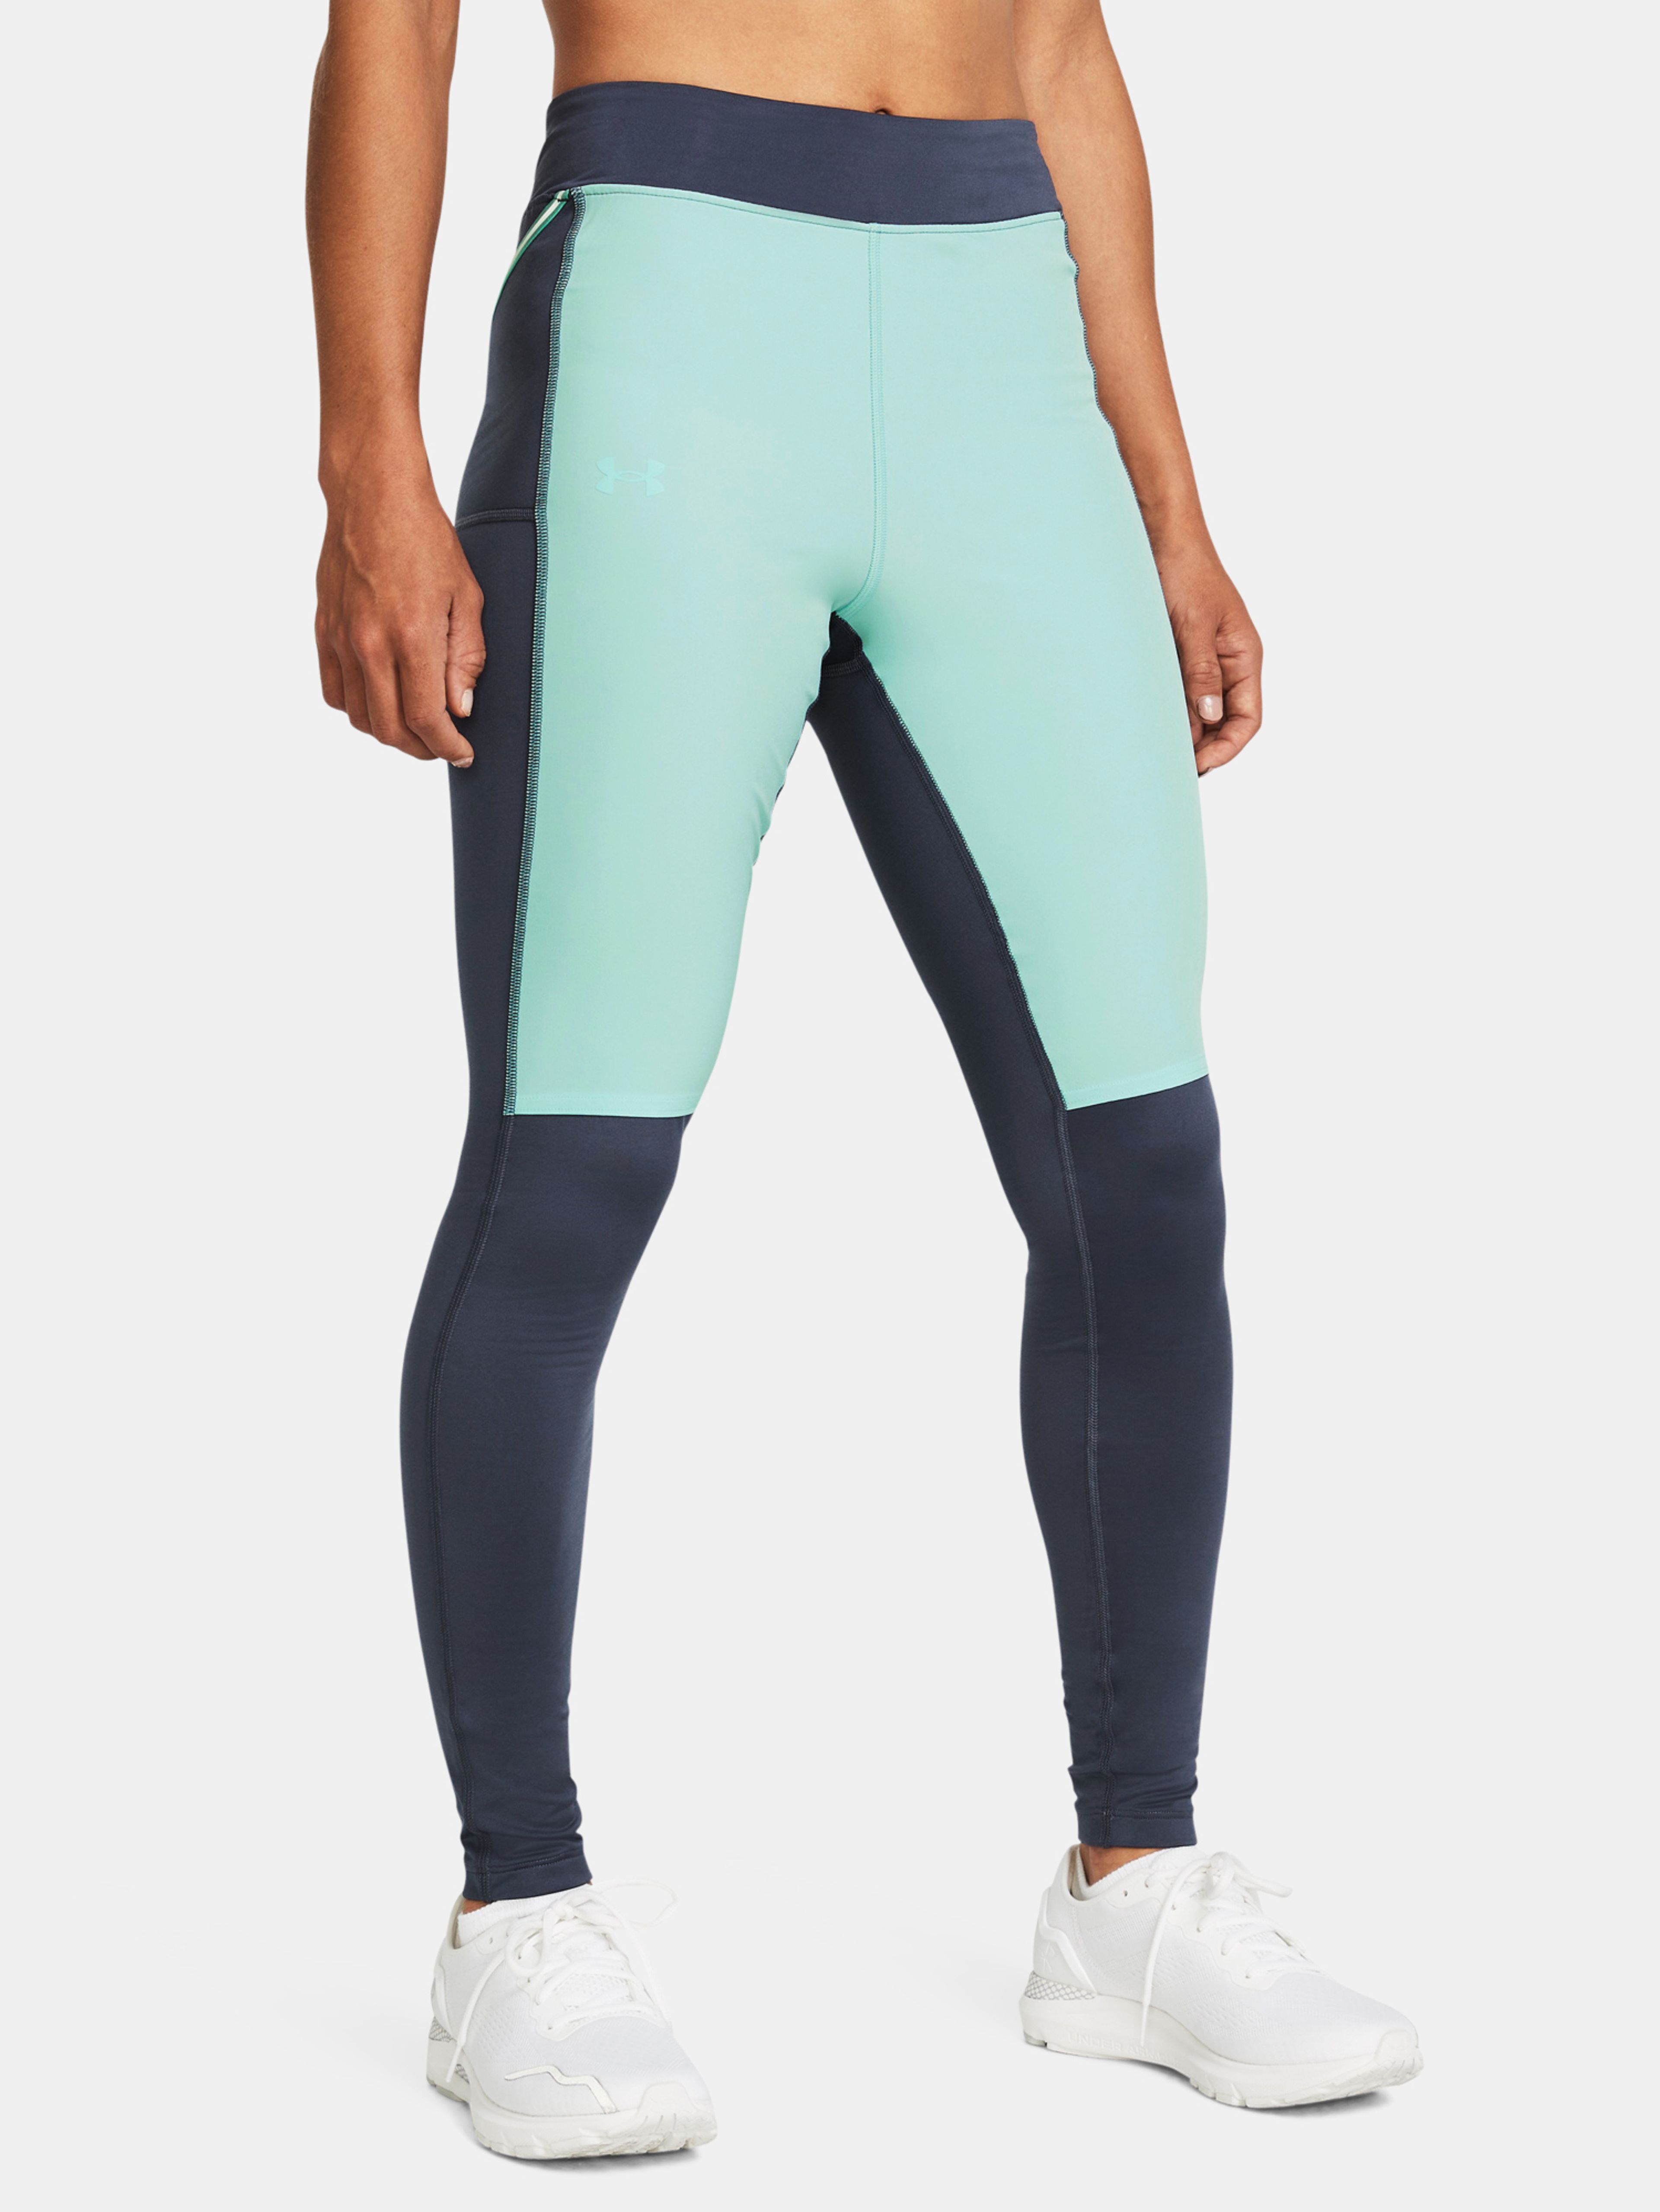 Under Armour Launch Elite Tight-GRY leggings